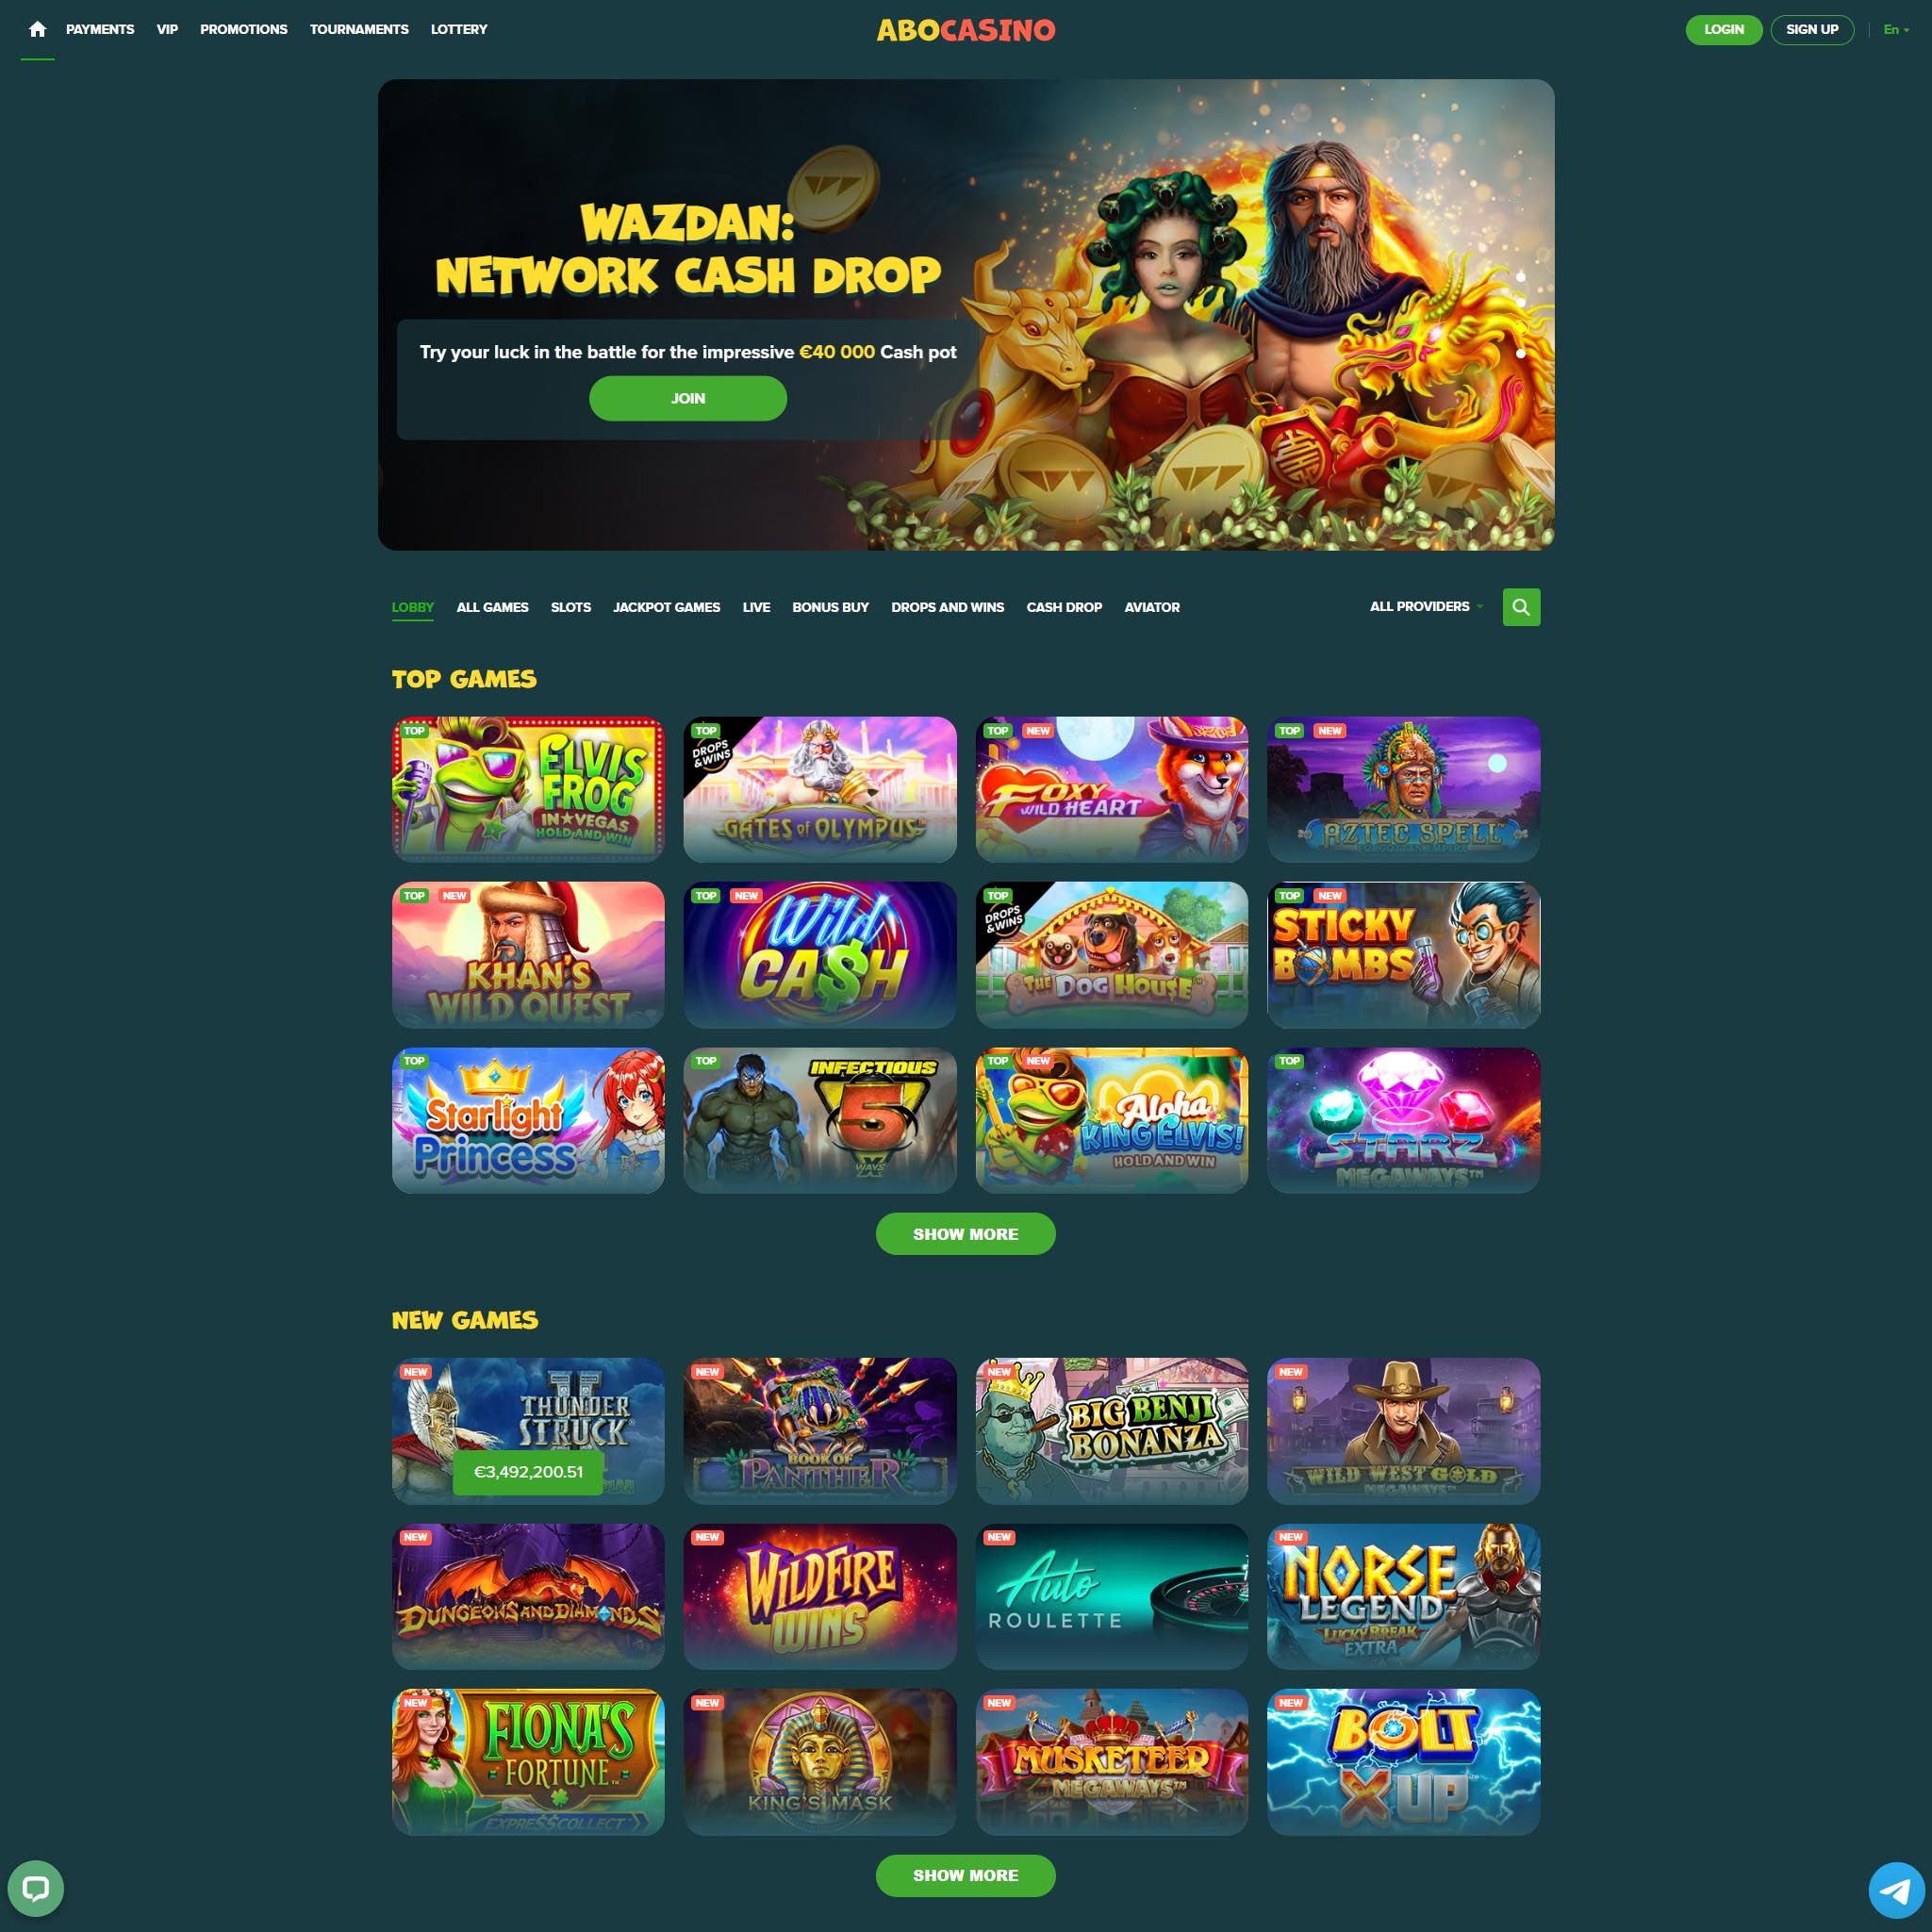 Abo Casino review by Mr. Gamble